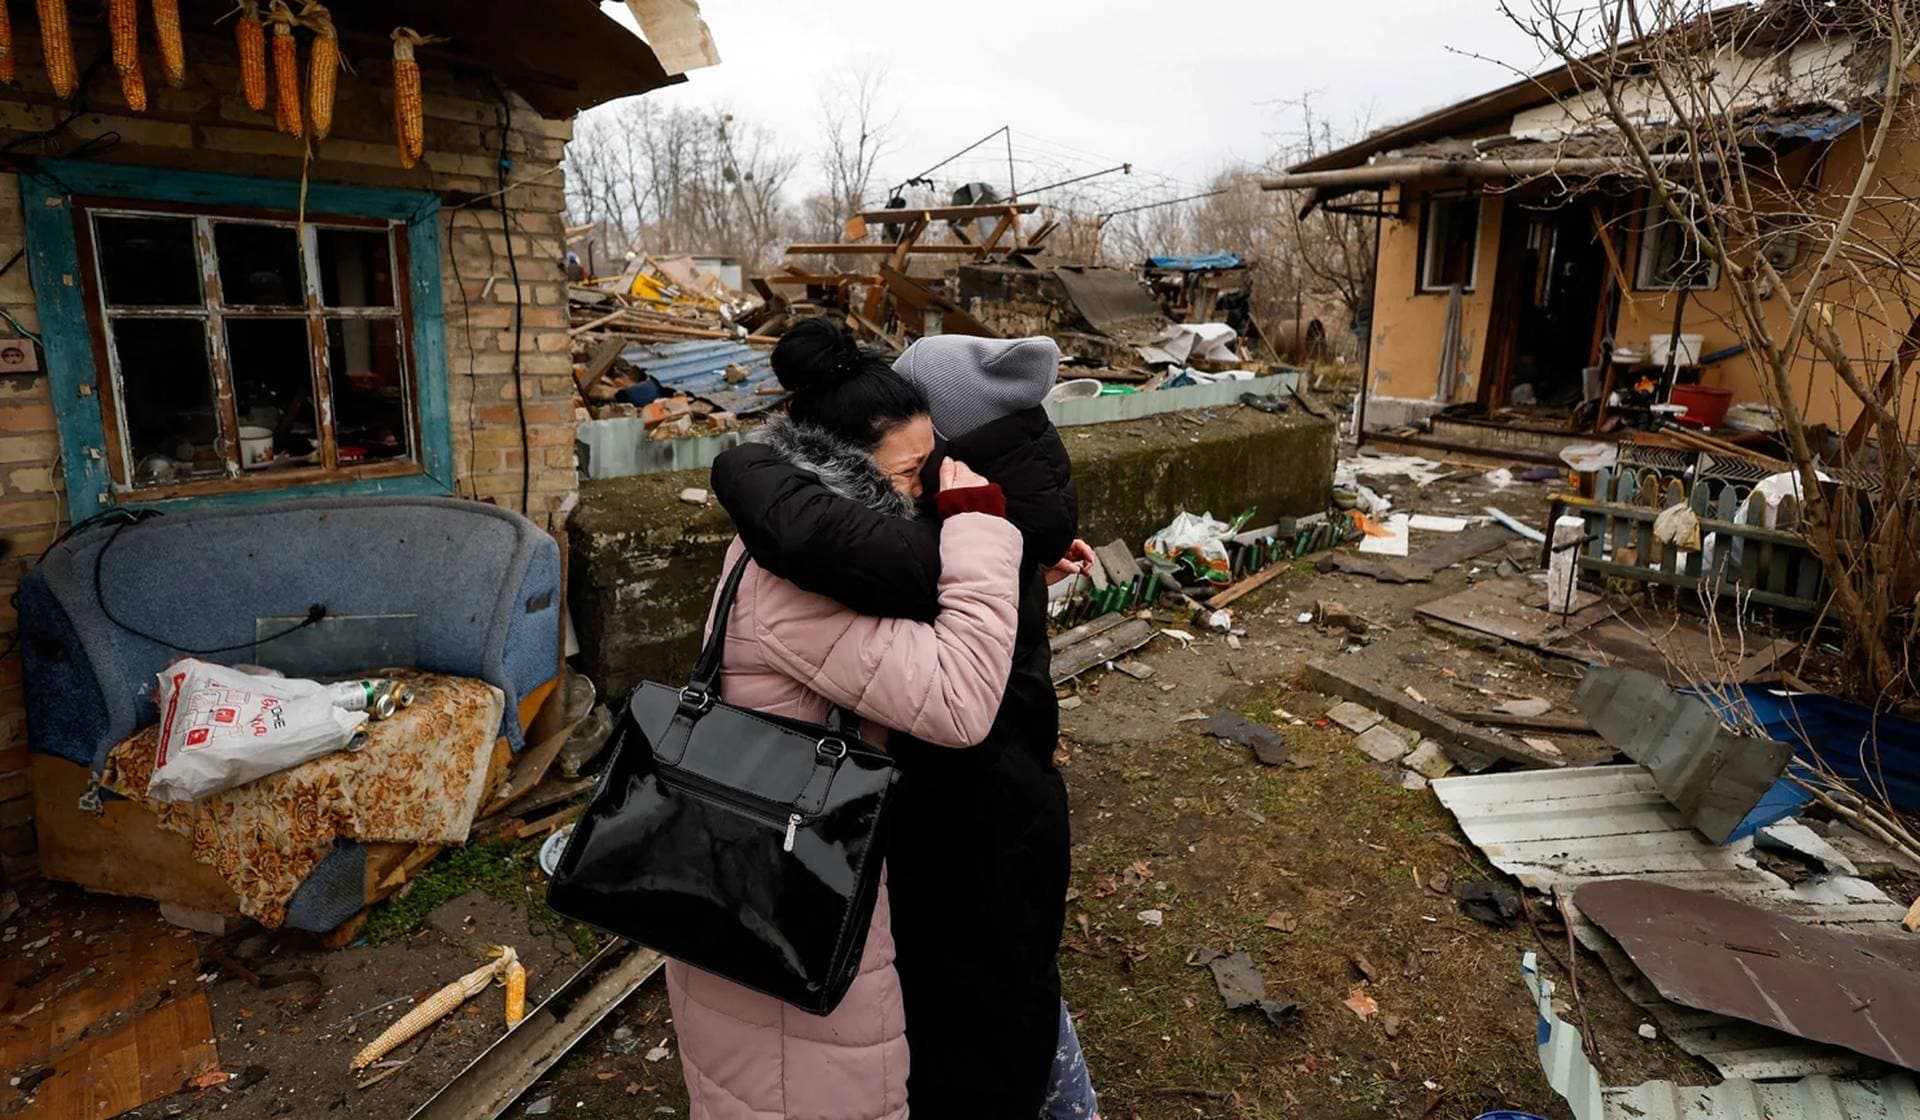 A local resident embraces a friend as she reacts next to her mother's house damaged during a Russian missile strike in Kyiv